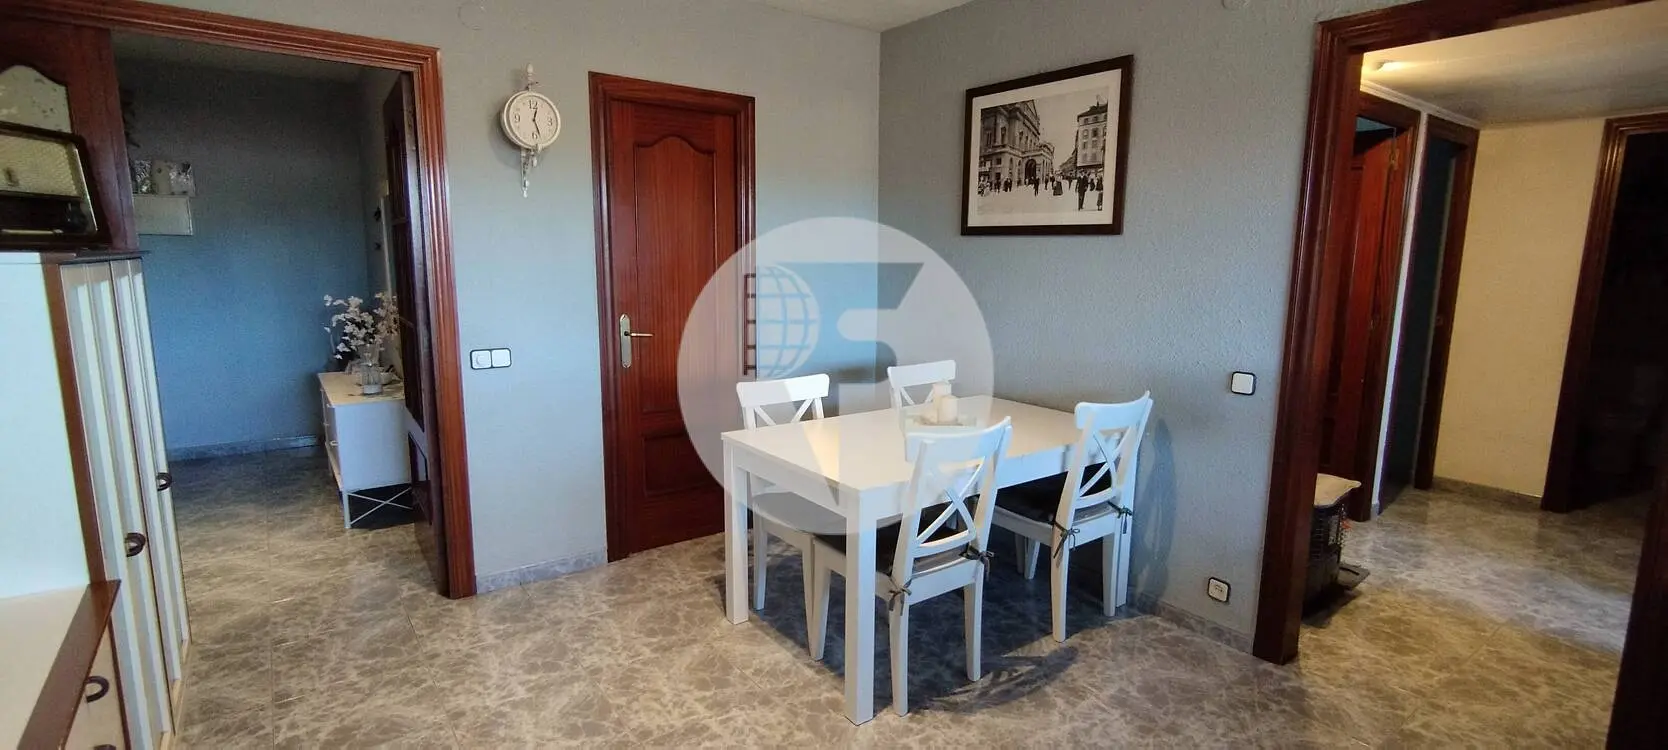 Charming 107m² flat with views and parking in Santa Eulalia de Ronçana 6